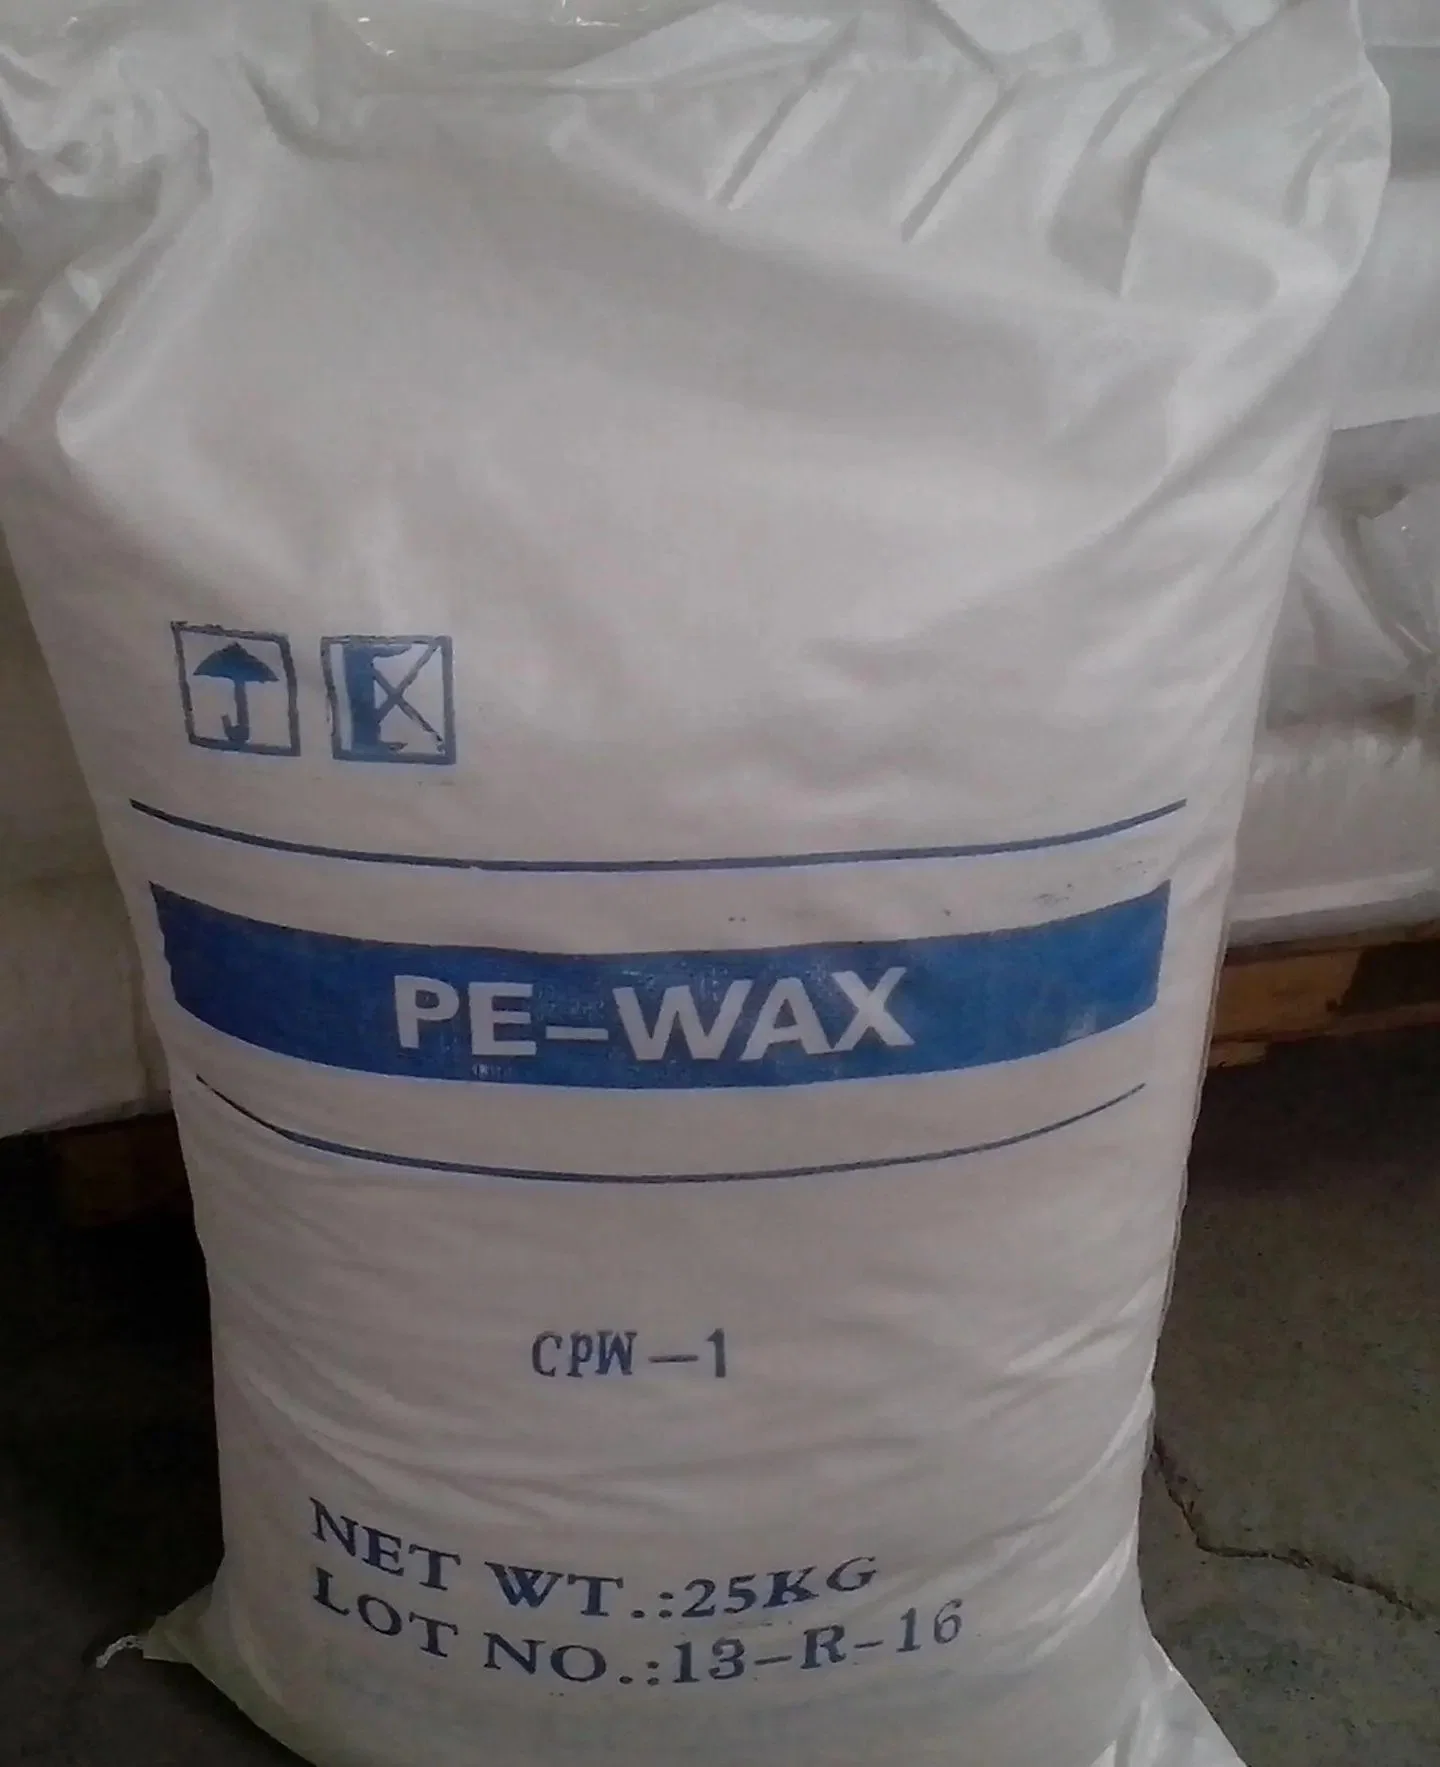 Polyethylene PE Wax Chemical for PVC Pipe and Fittings. Chemical